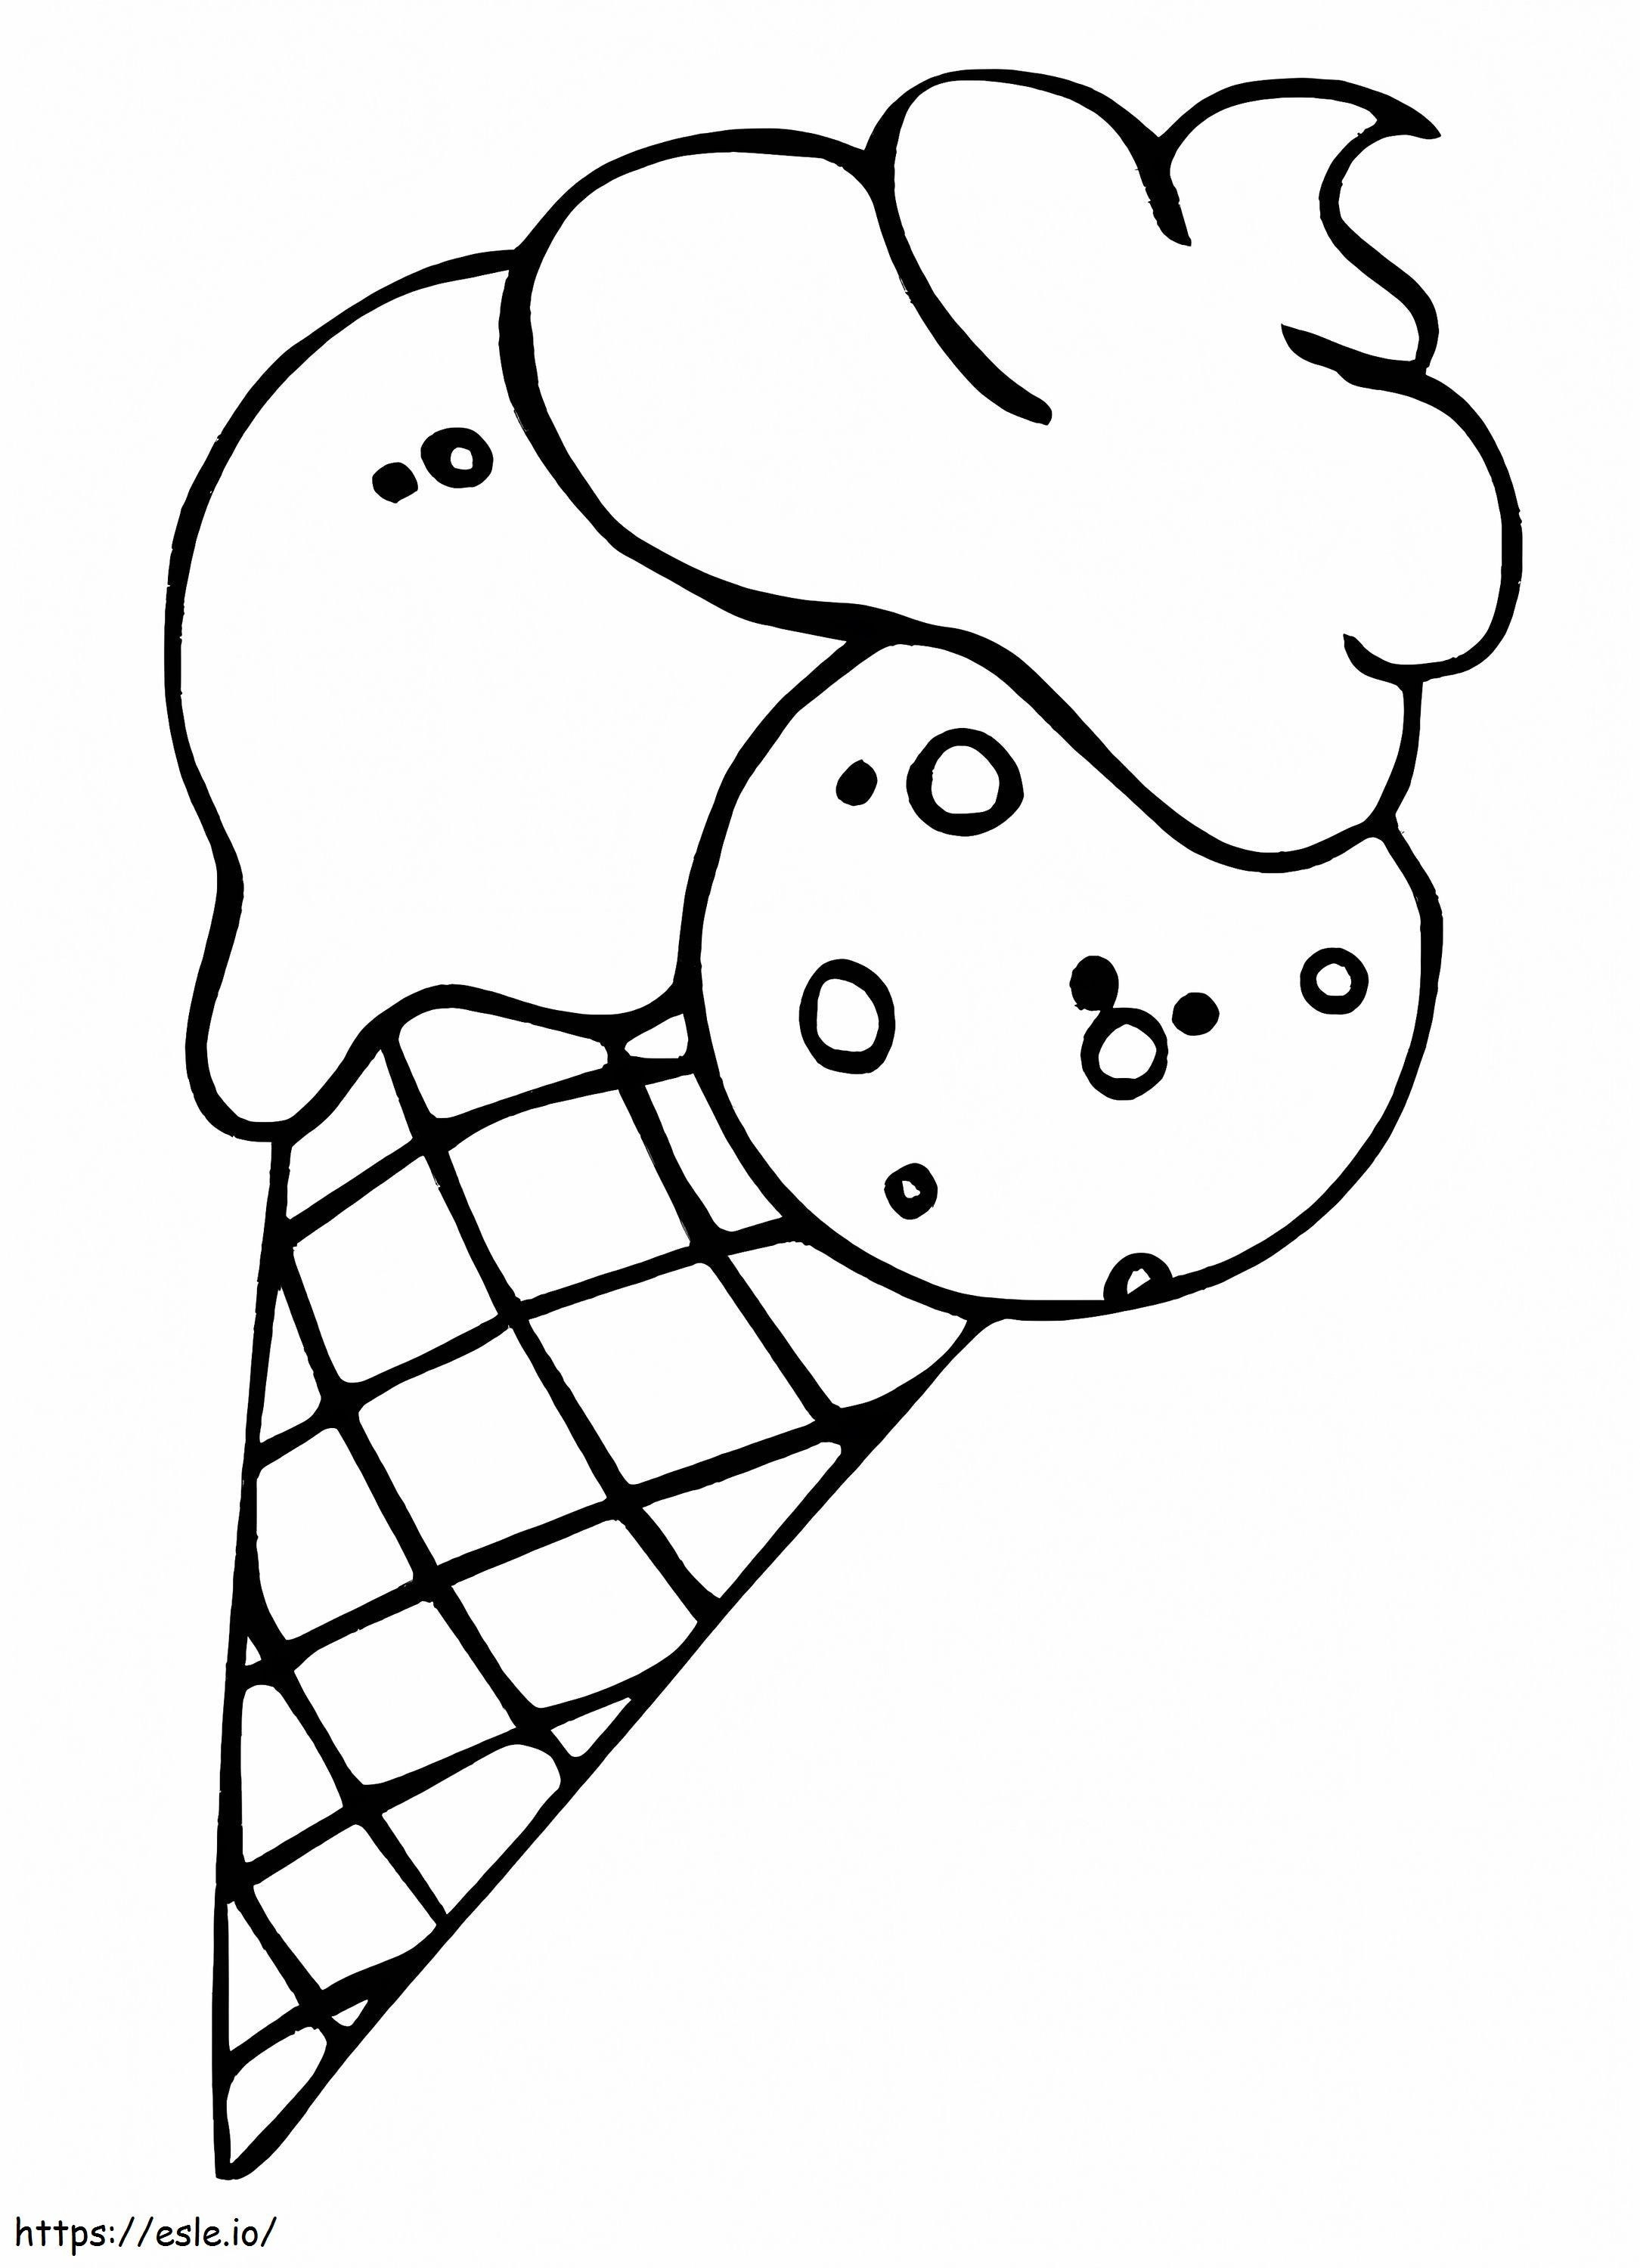 Printable Ice Cream coloring page